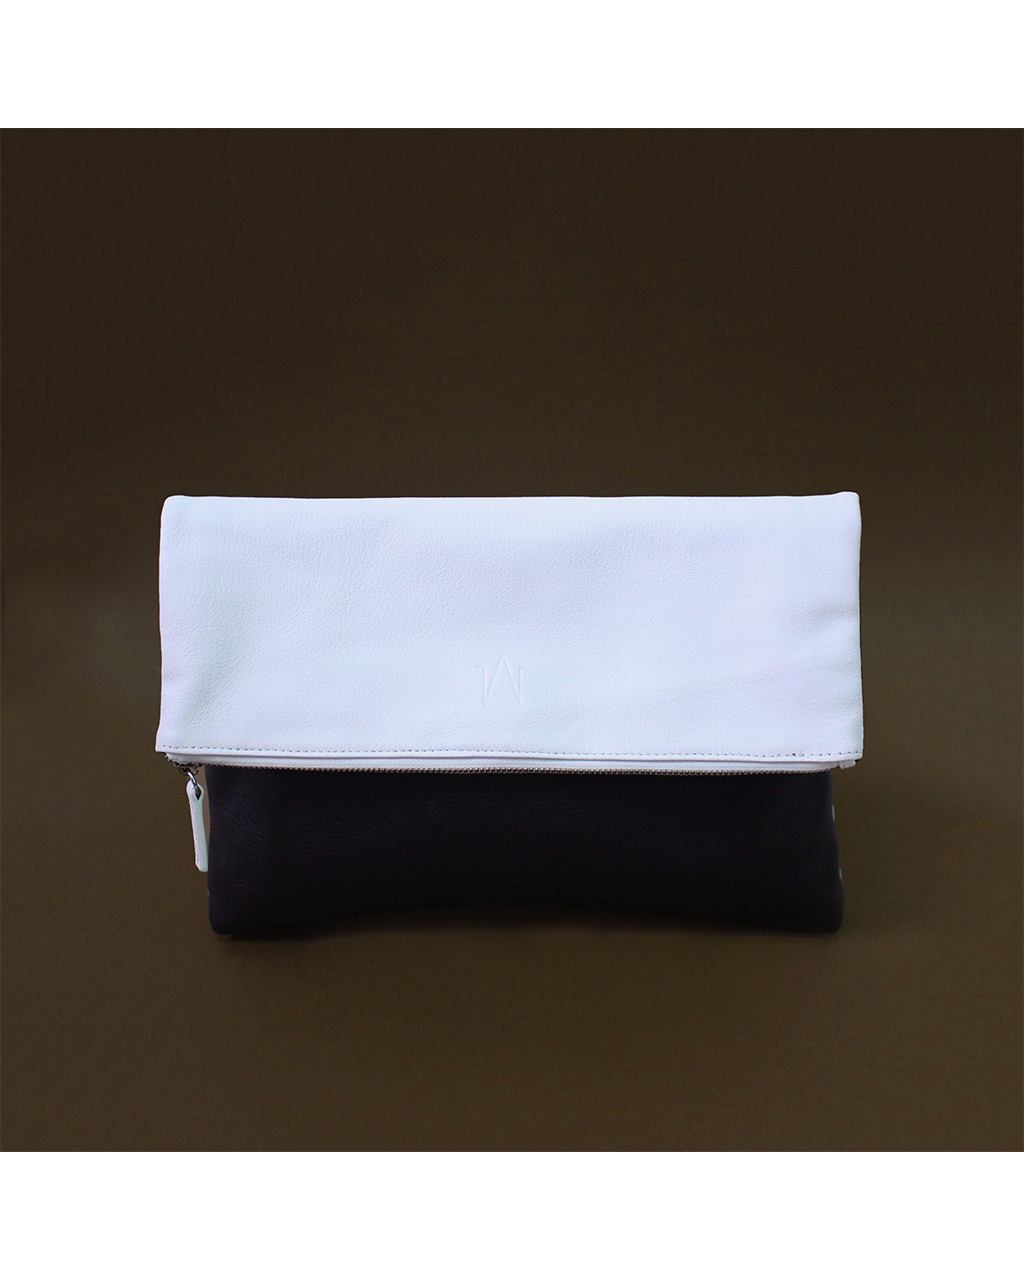 TAT_normcore_14582_twotone unisex clutch_bw front view